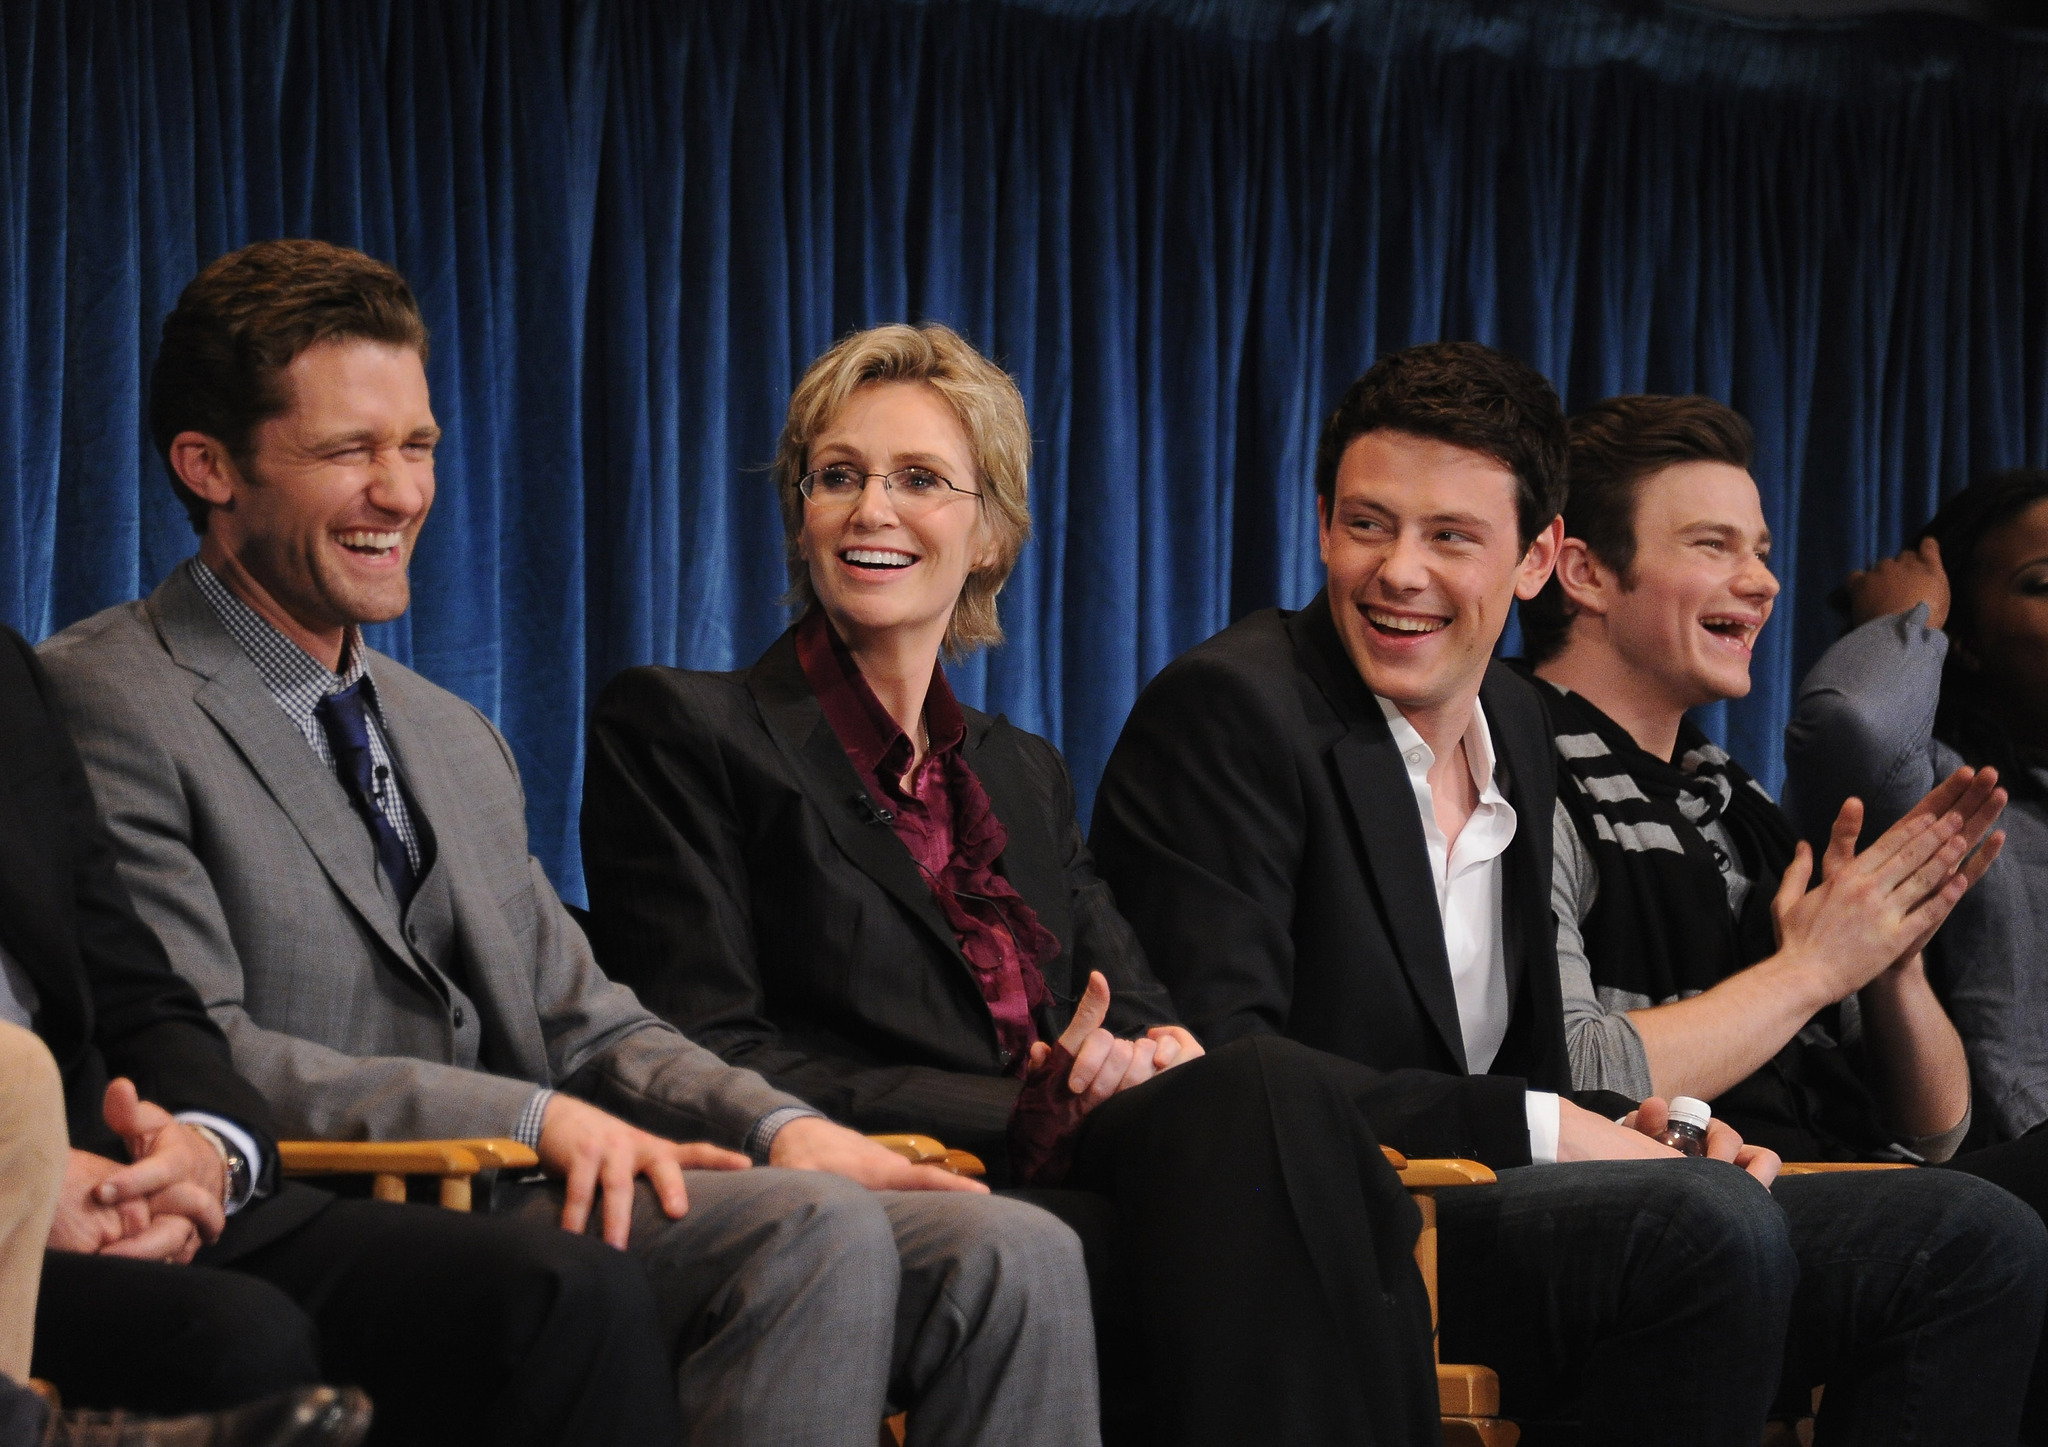 Jane Lynch, Matthew Morrison and Cory Monteith at event of Glee (2009)